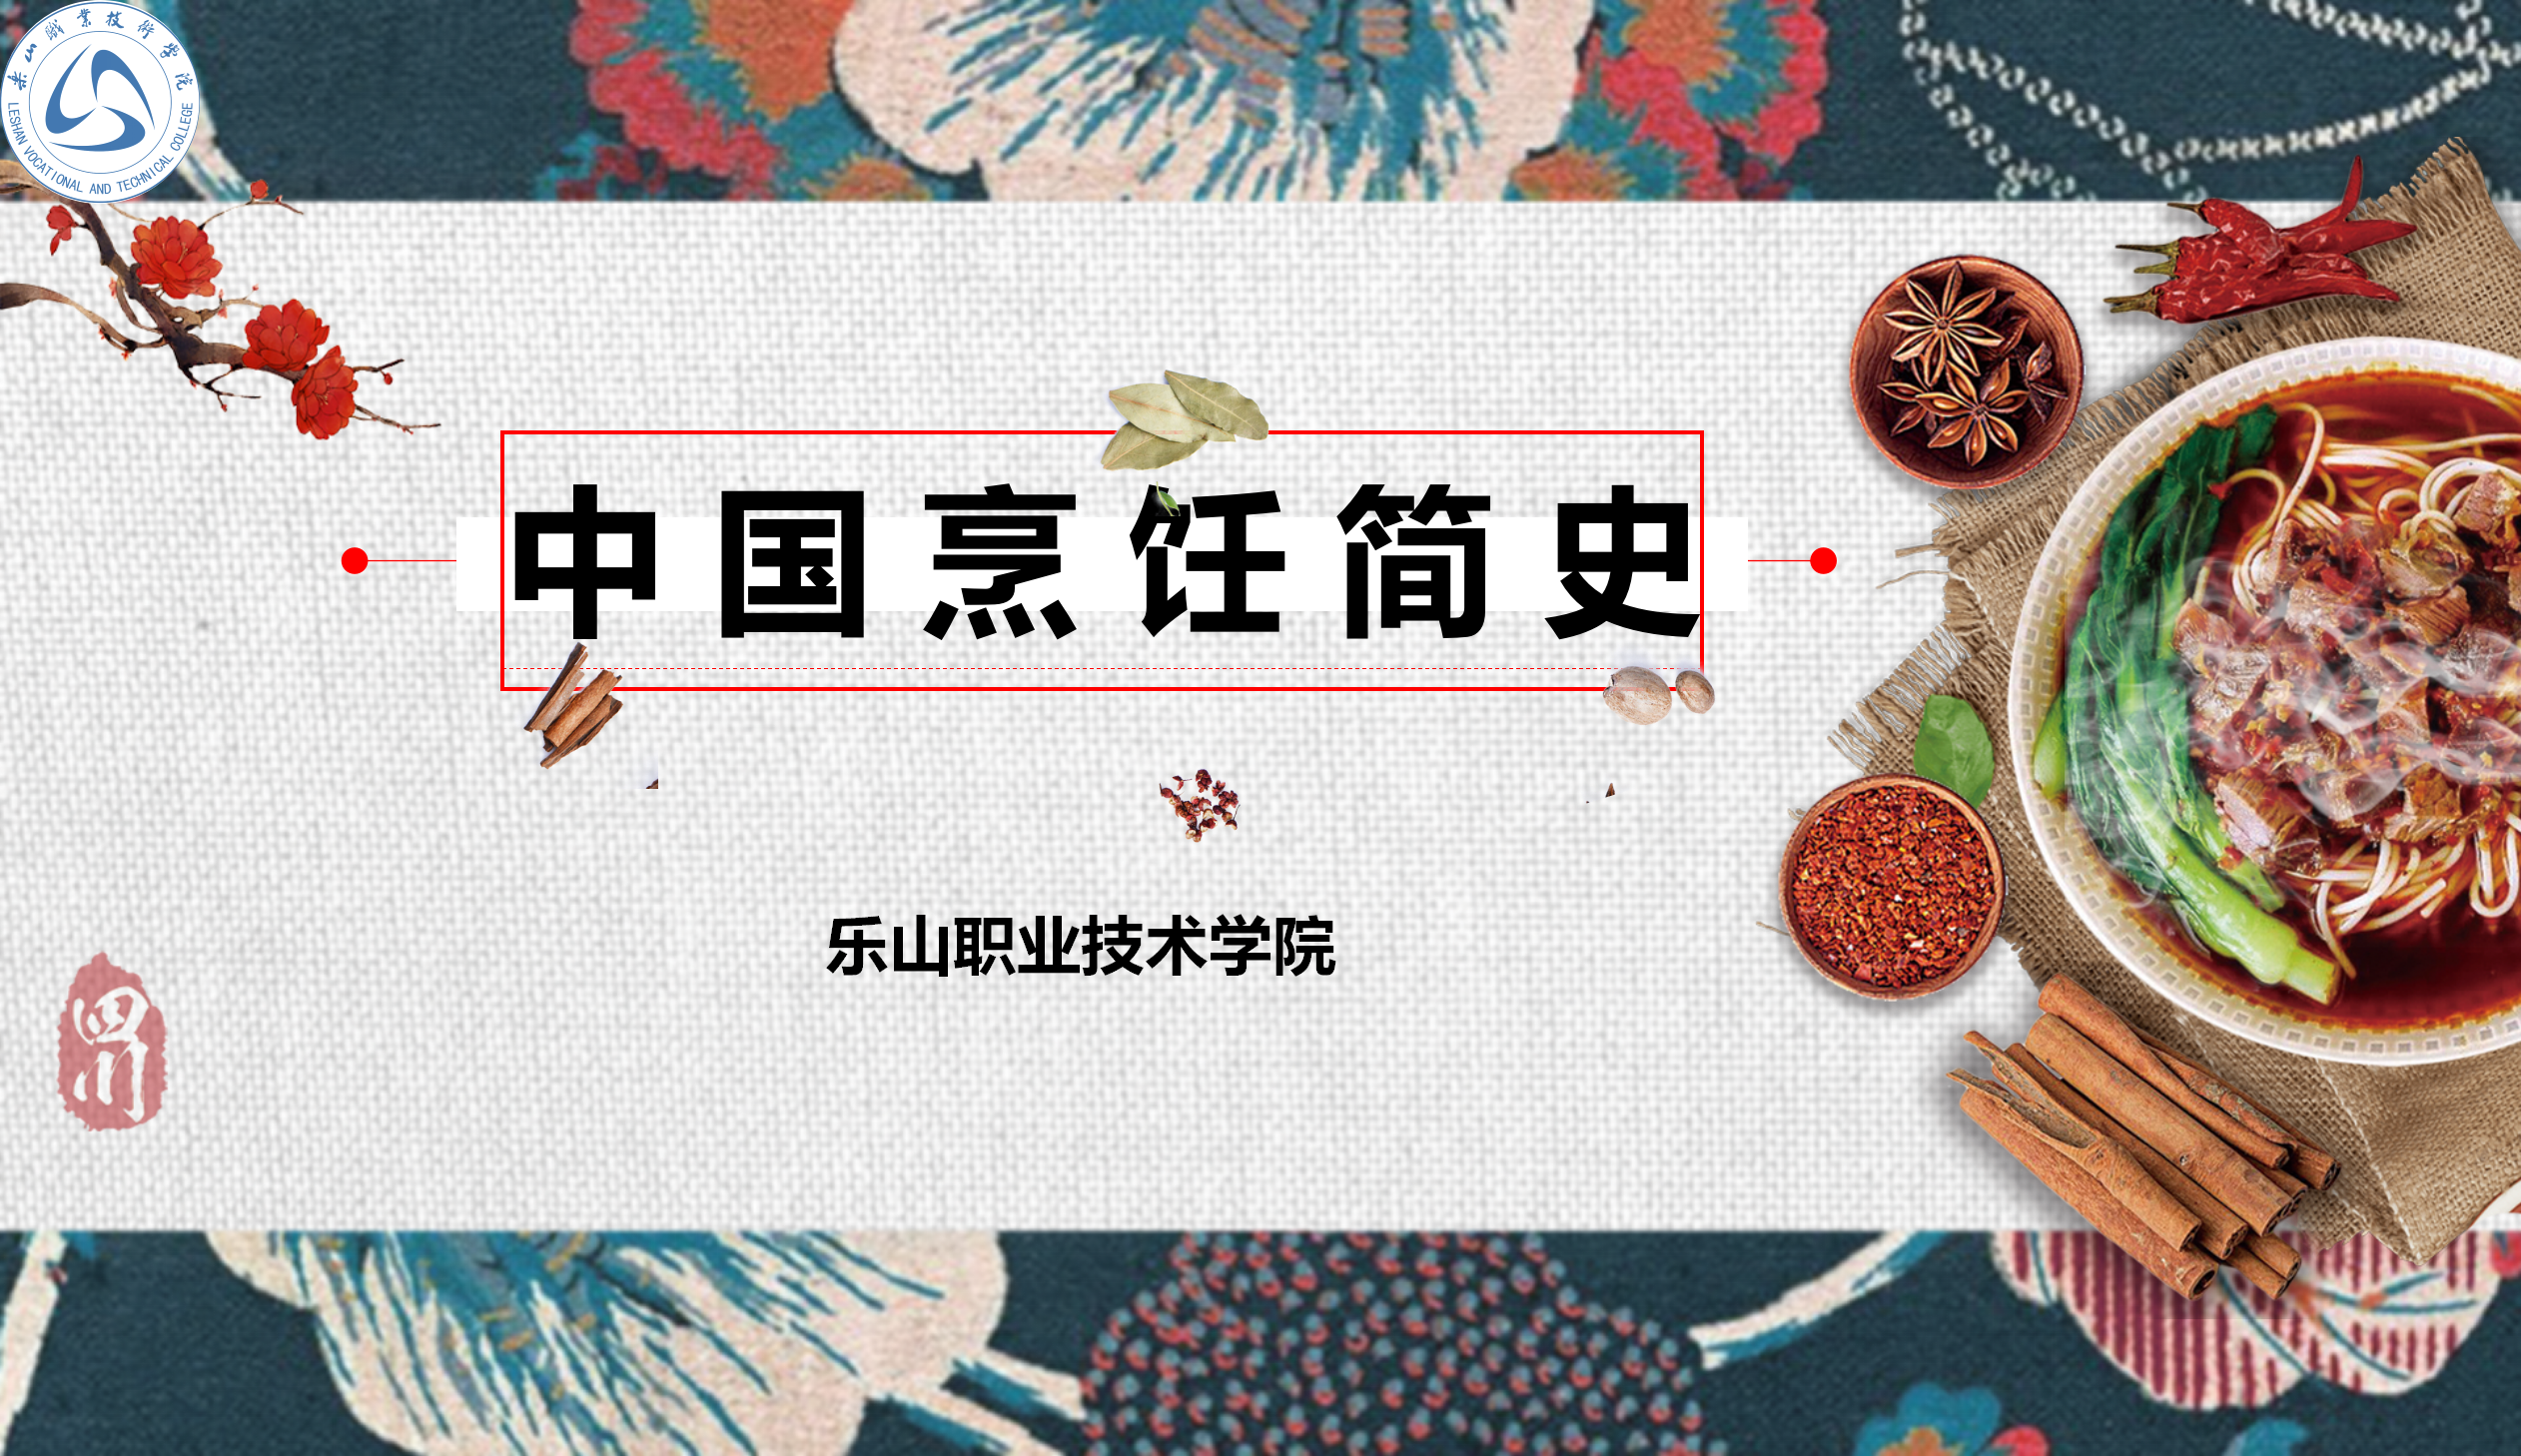 A brief history of Chinese cuisine